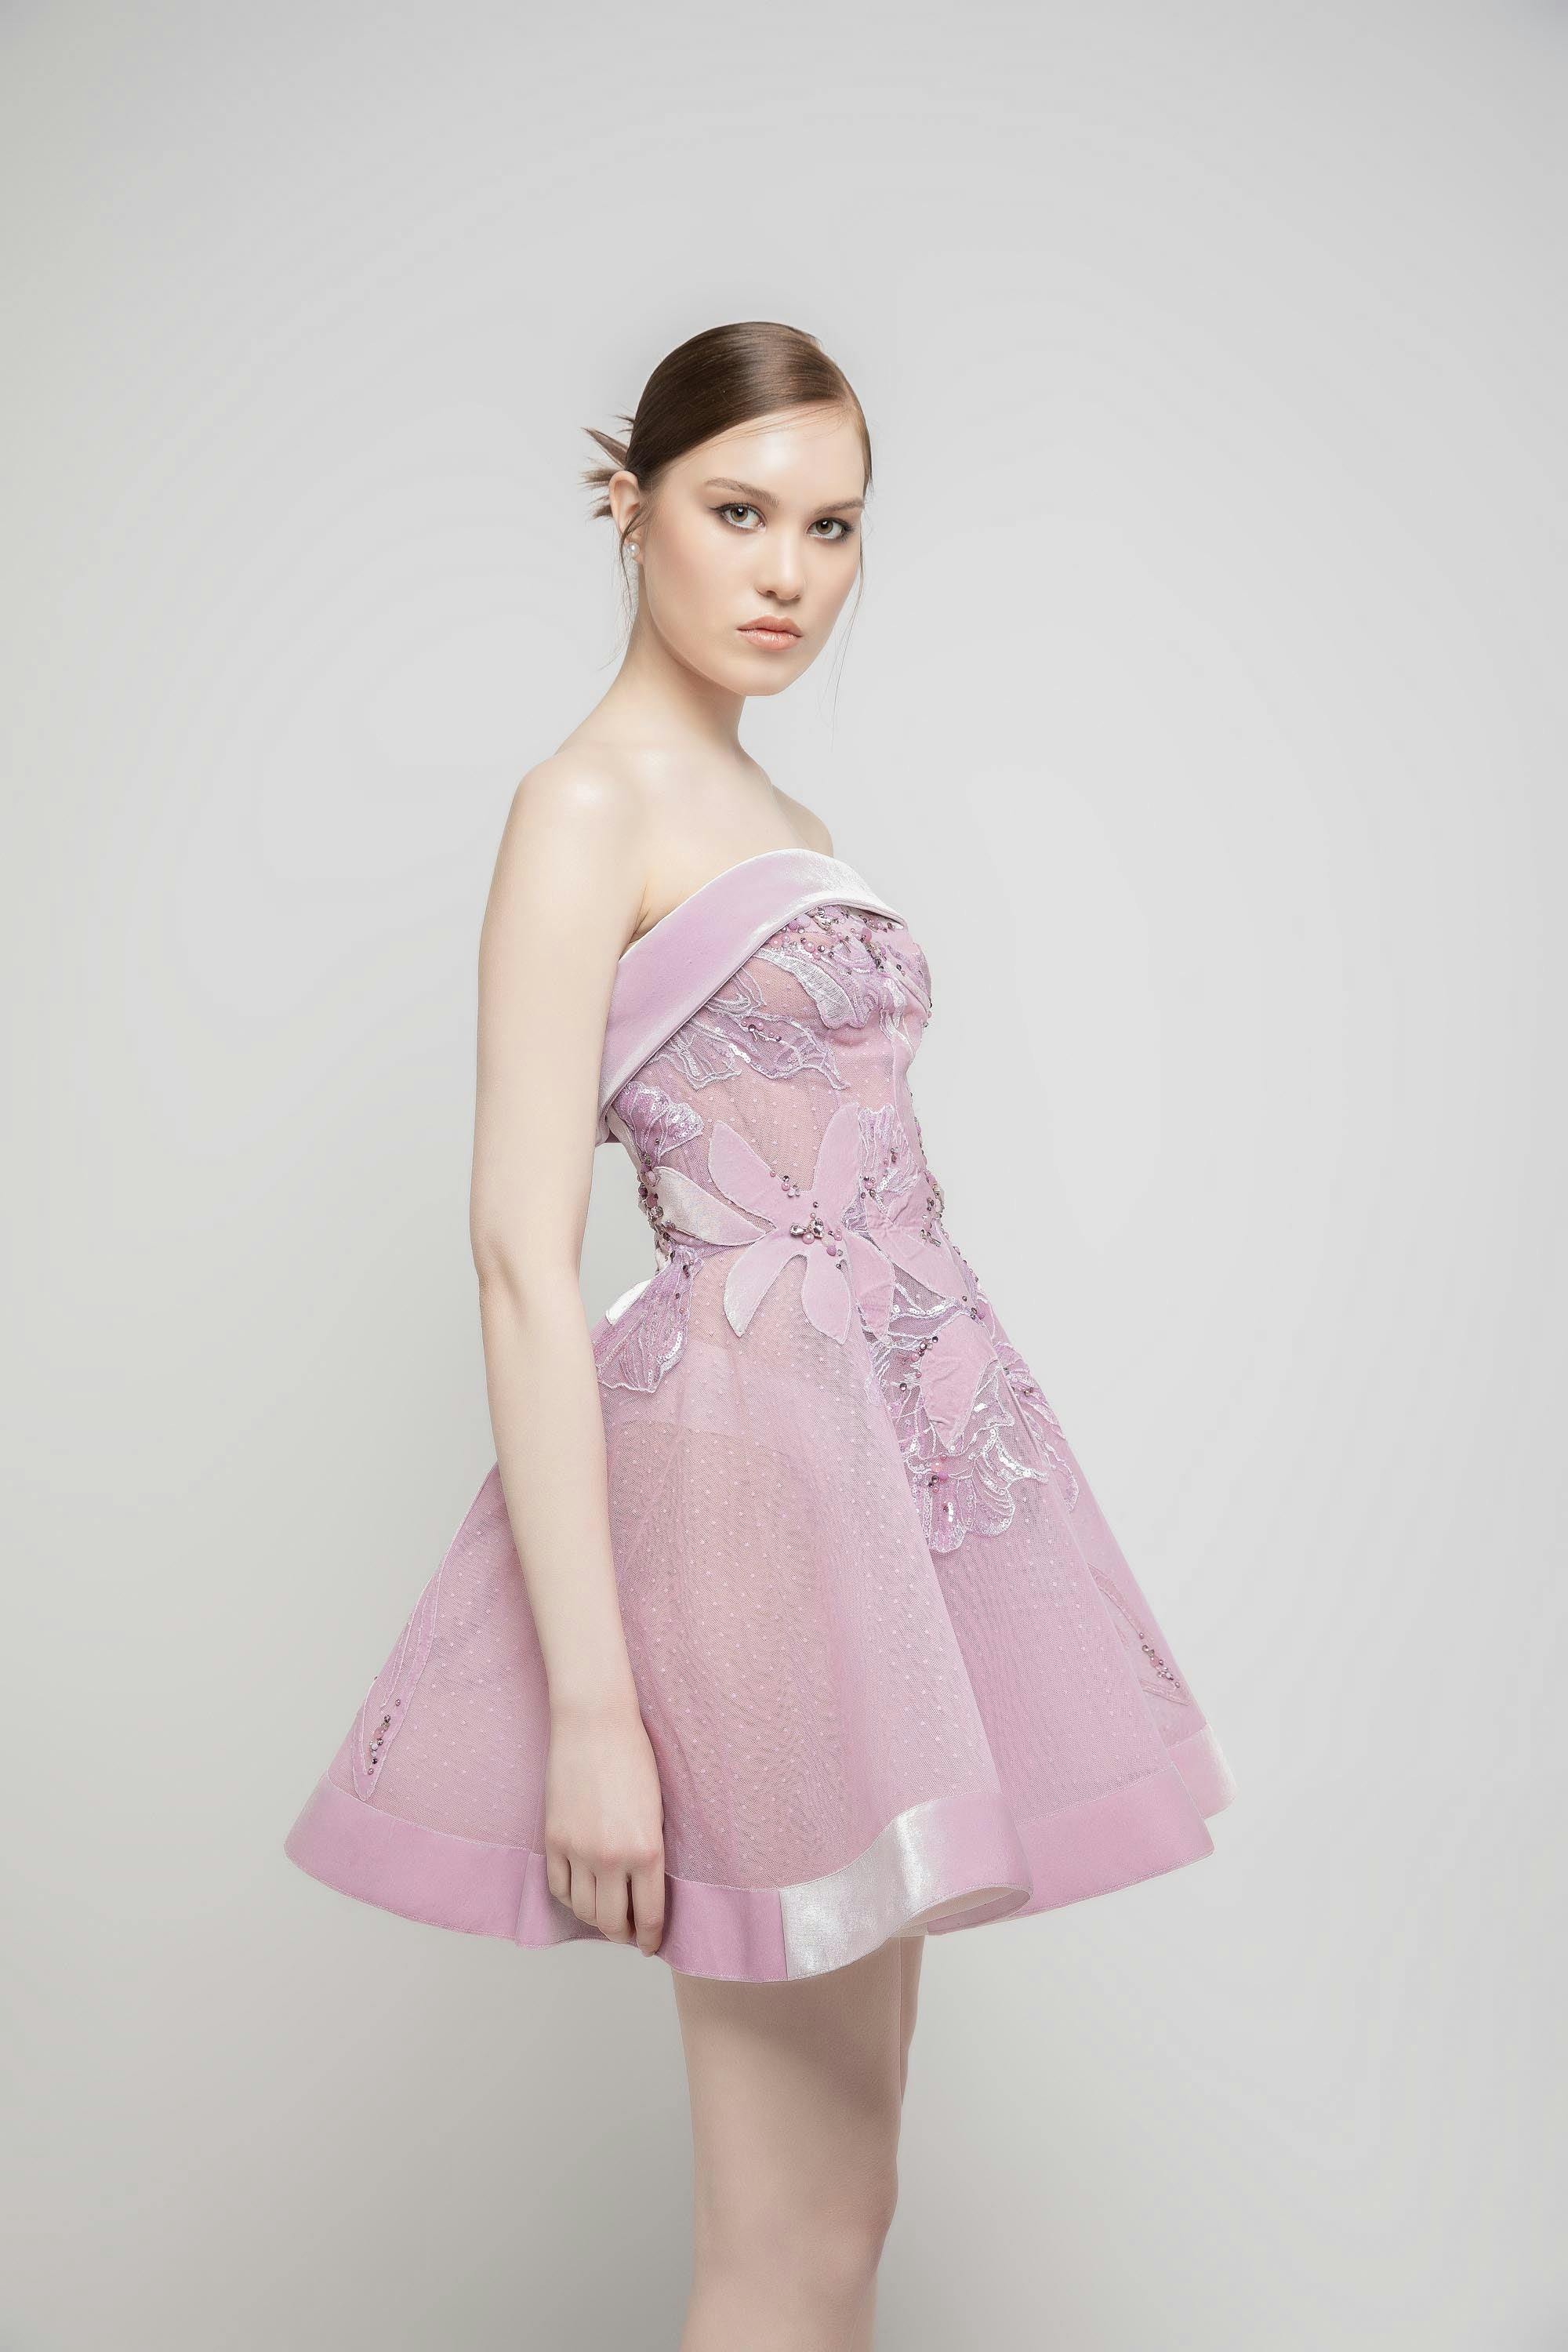 Look 23 B - Jean fares couture - JFC- baby pink fairytale short mouseline dress